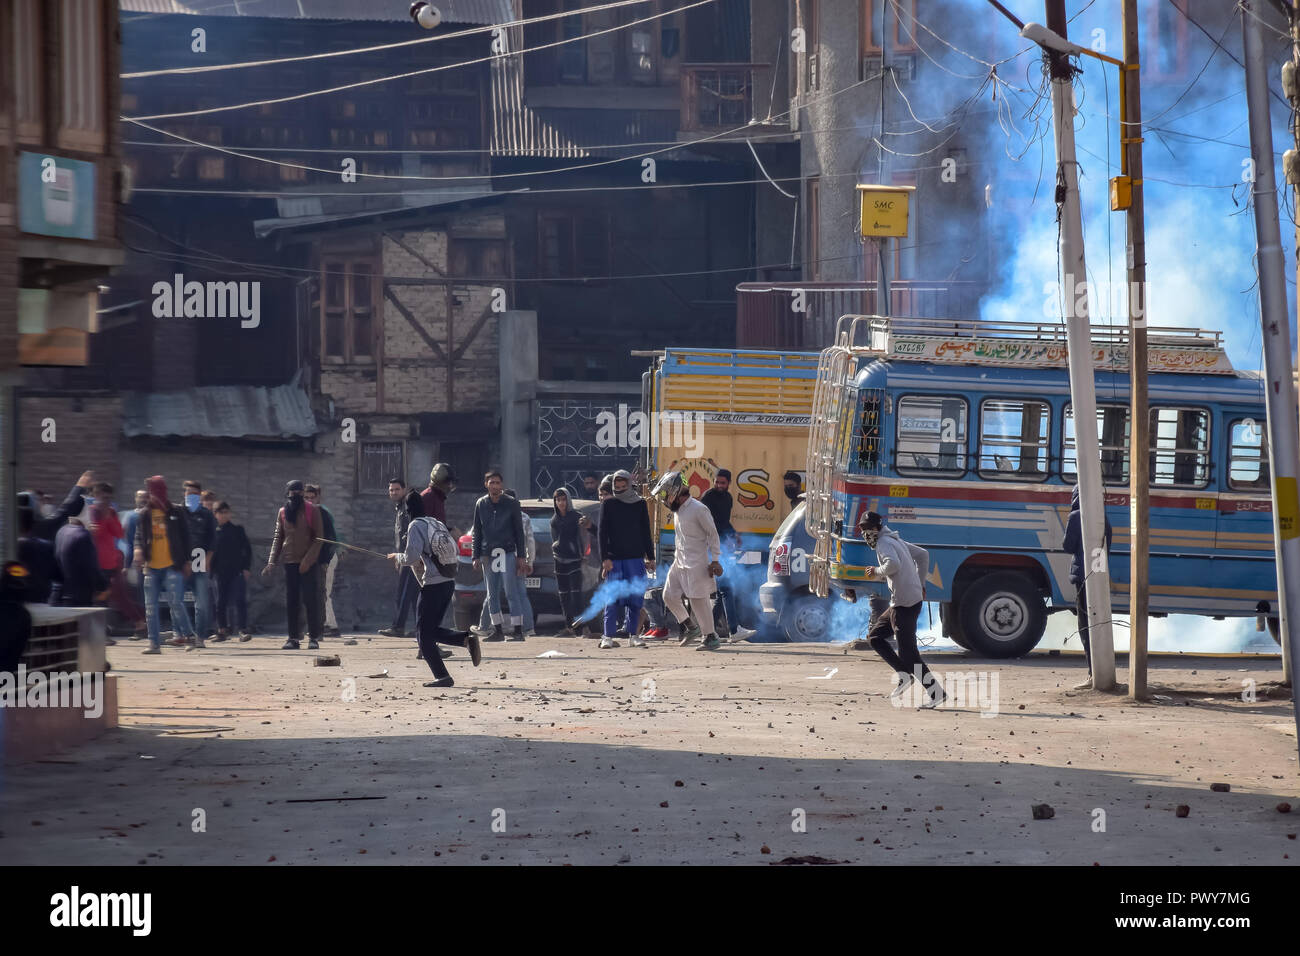 October 17, 2018 - Srinagar, Jammu & Kashmir, India - Kashmiri Protesters are seen reacting towards used tear gas smoke canisters during clashes. Credit: Idrees Abbas/SOPA Images/ZUMA Wire/Alamy Live News Stock Photo